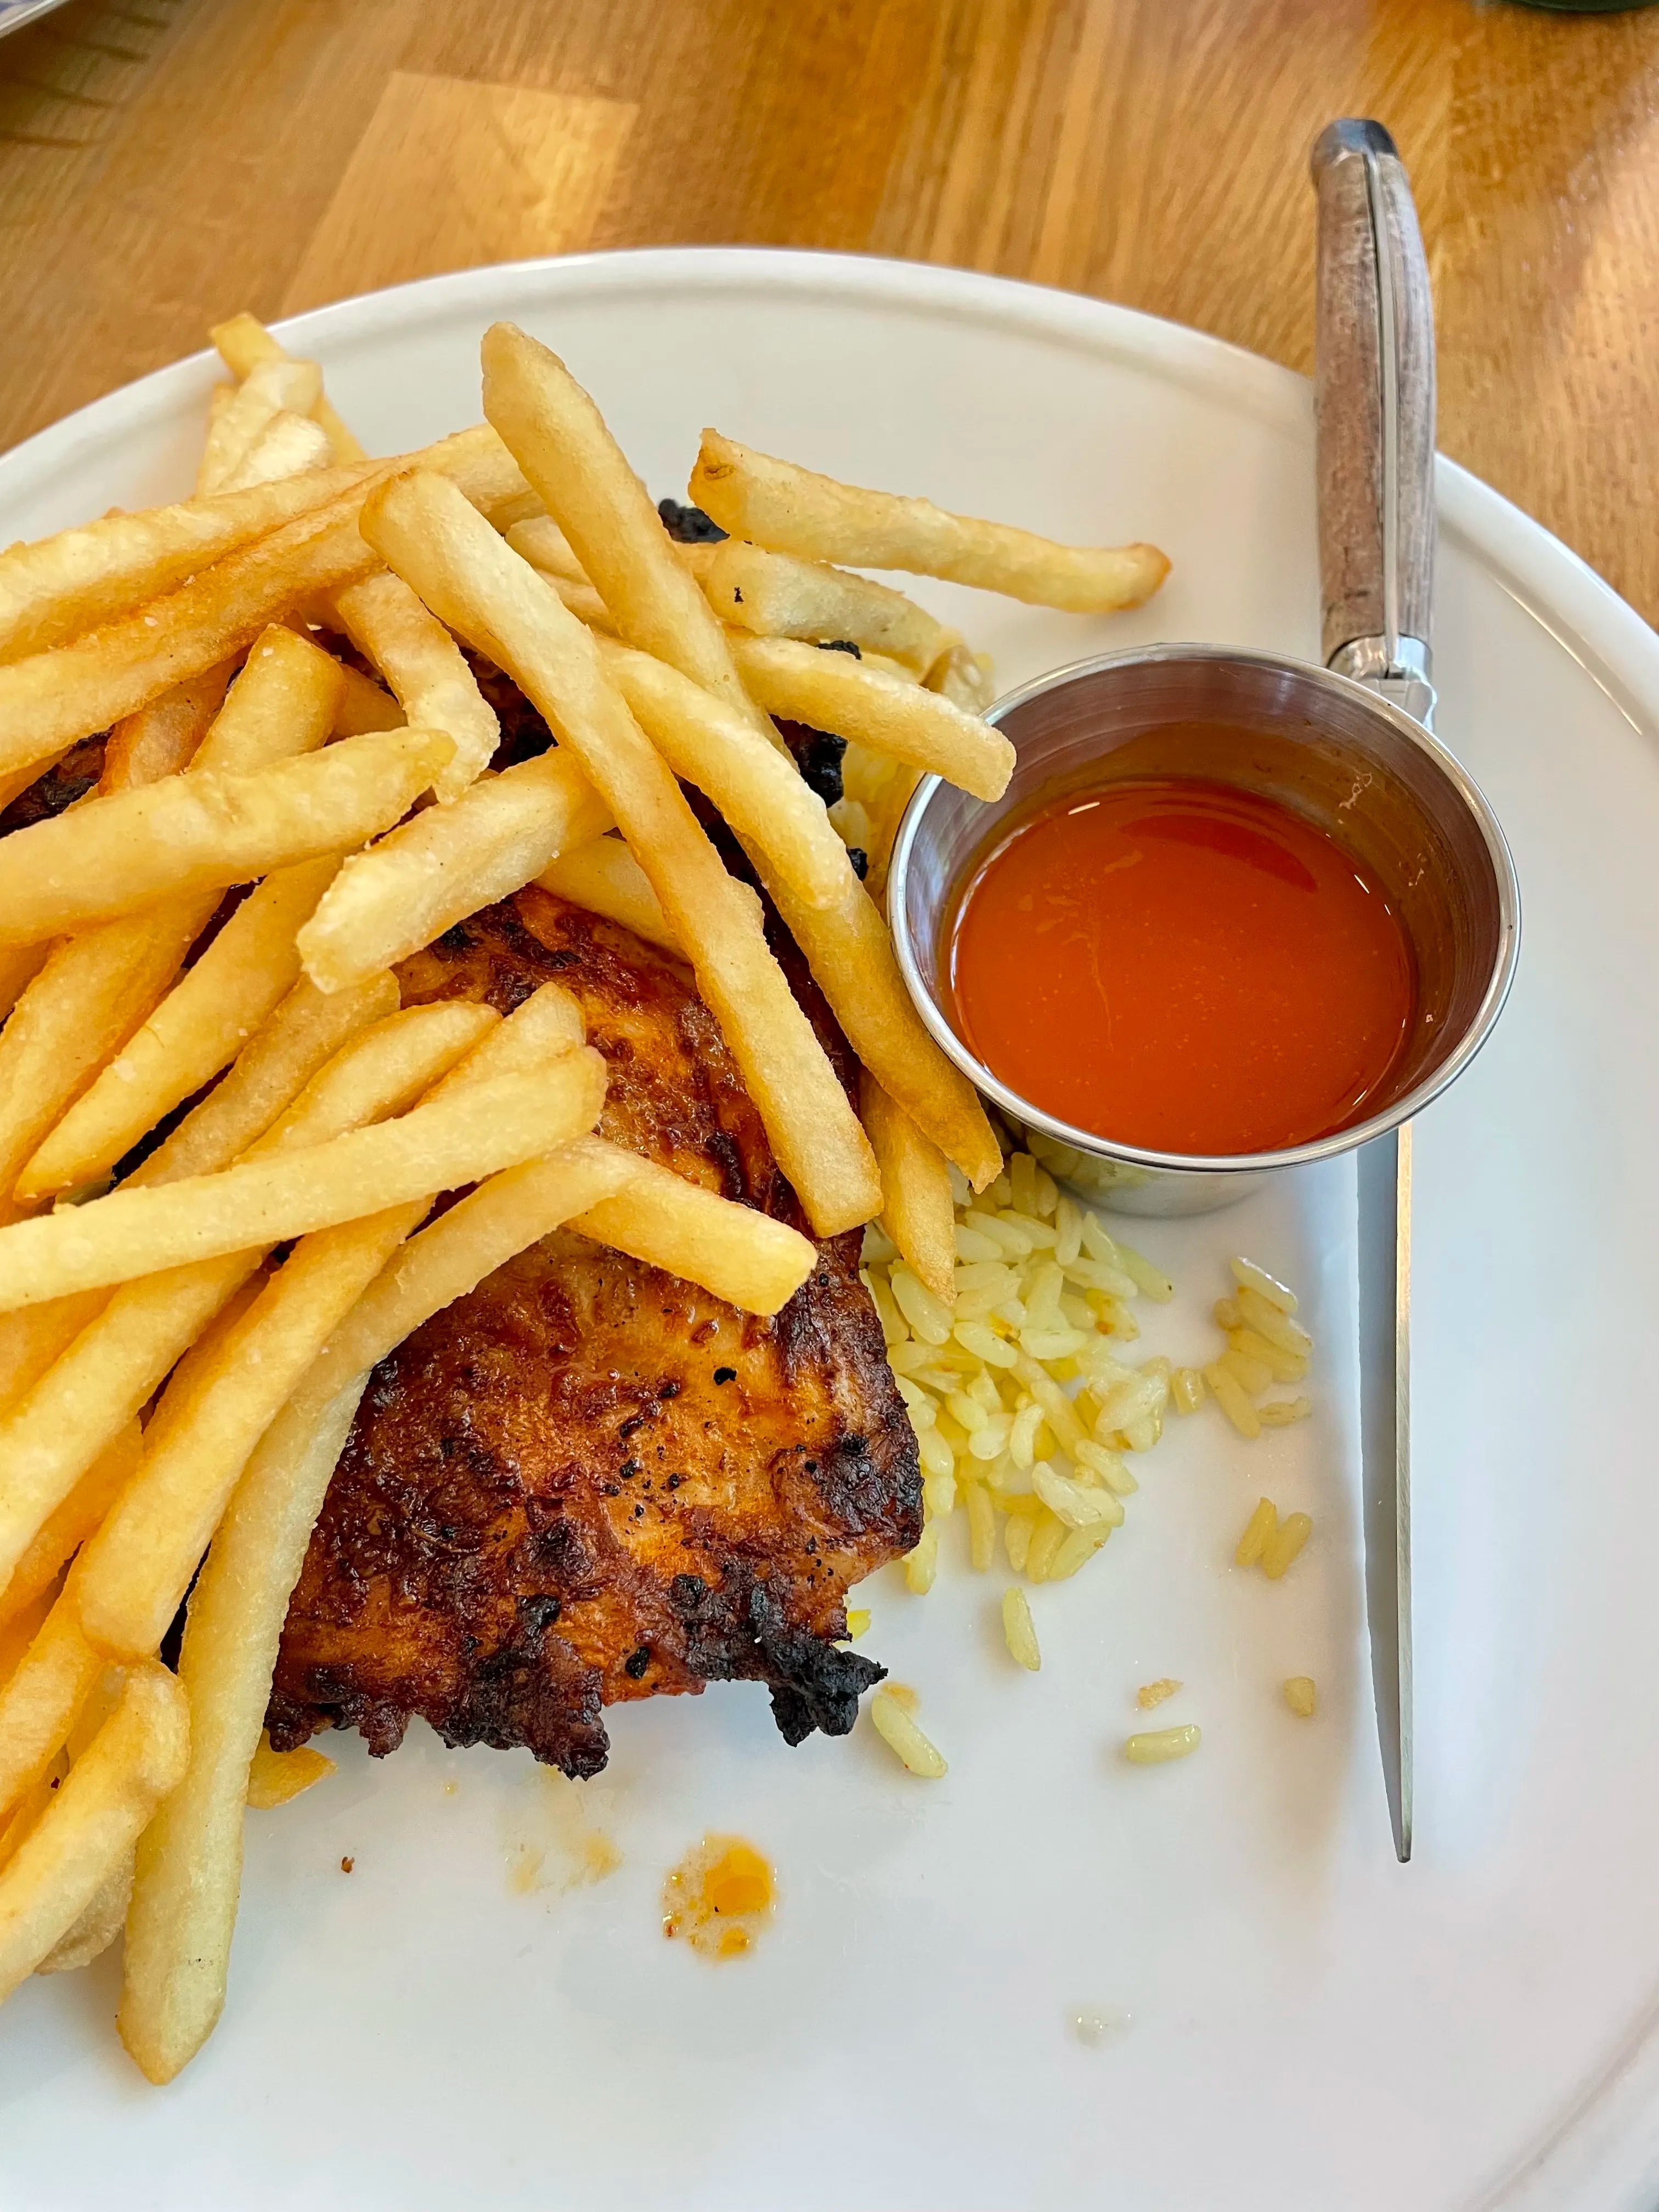 Grilled piri-piri chicken with saffron rice and French fries at Gilda Cafe & Market.